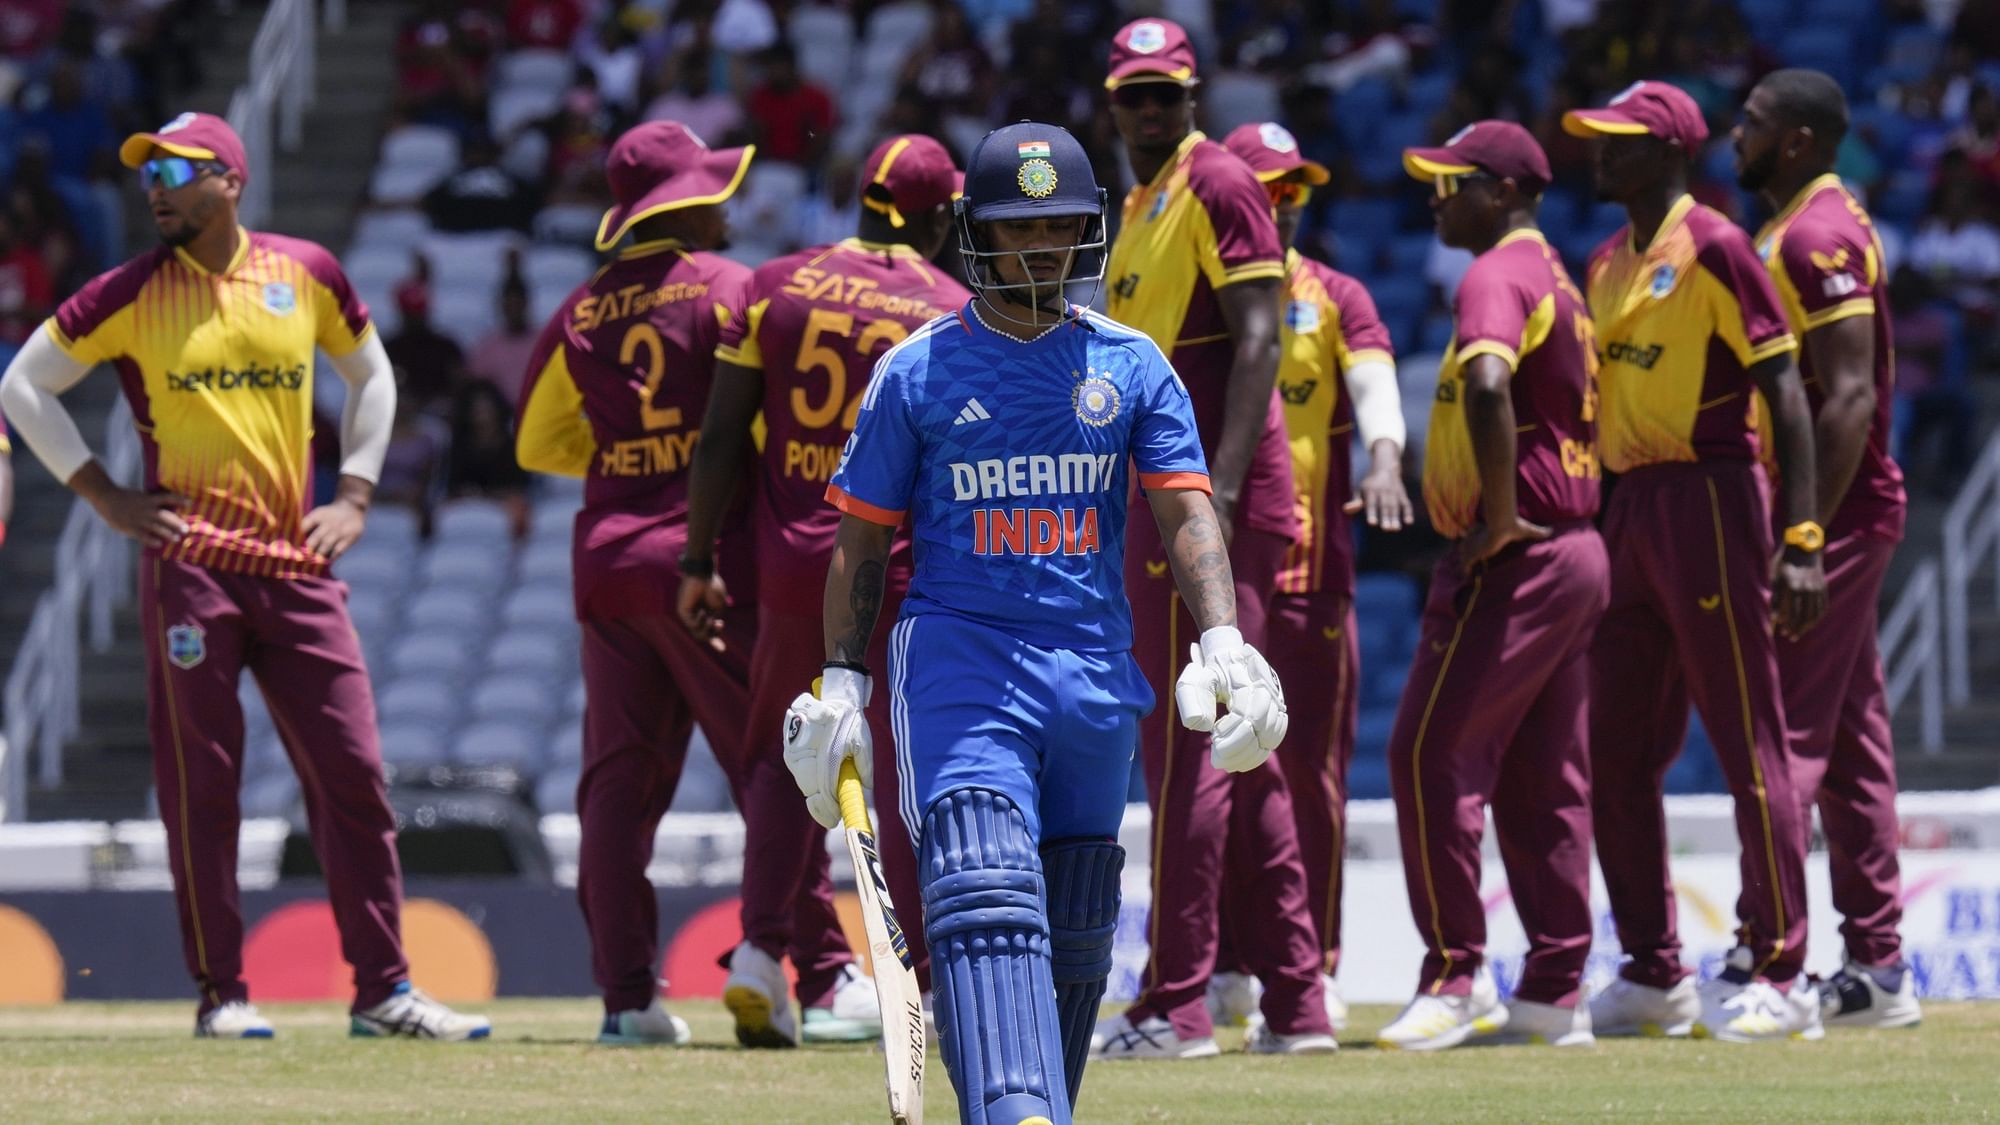 IND vs WI 3rd T20 Live Streaming and Telecast India vs West Indies 3rd T20I Date, Time, Venue, Squads, Prediction, and More